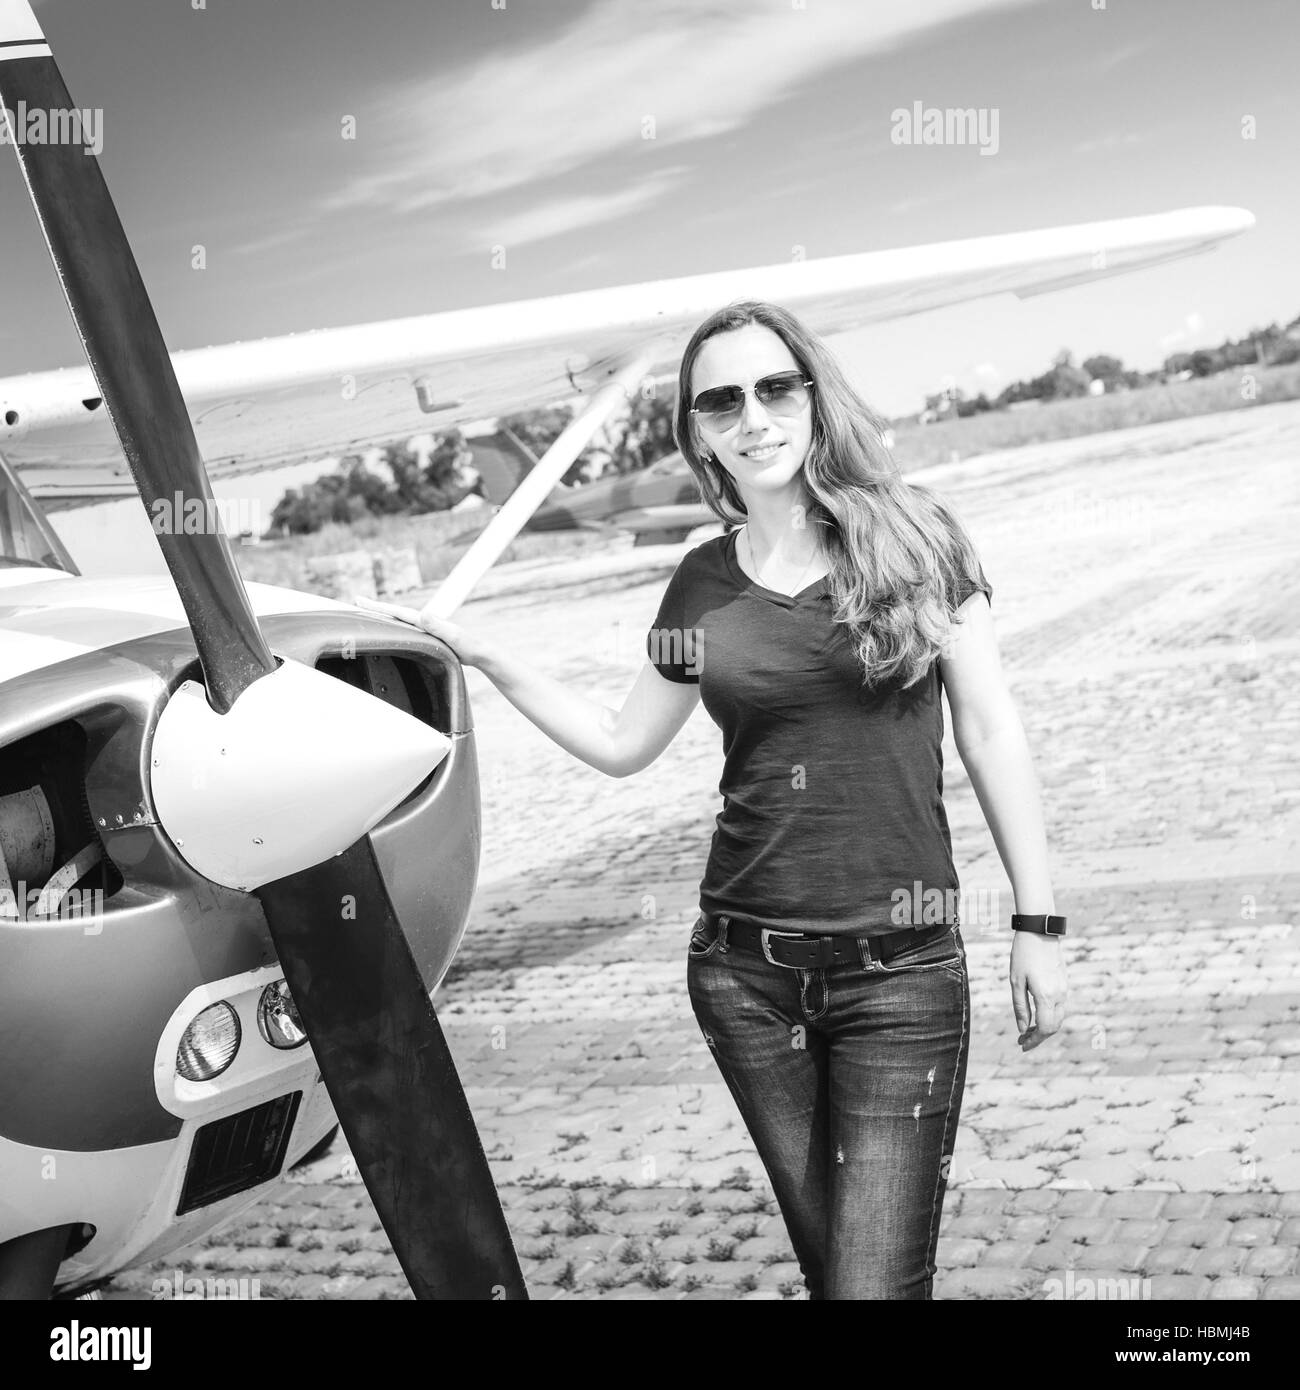 Young smiling woman standing near private plane ready for flight Stock Photo